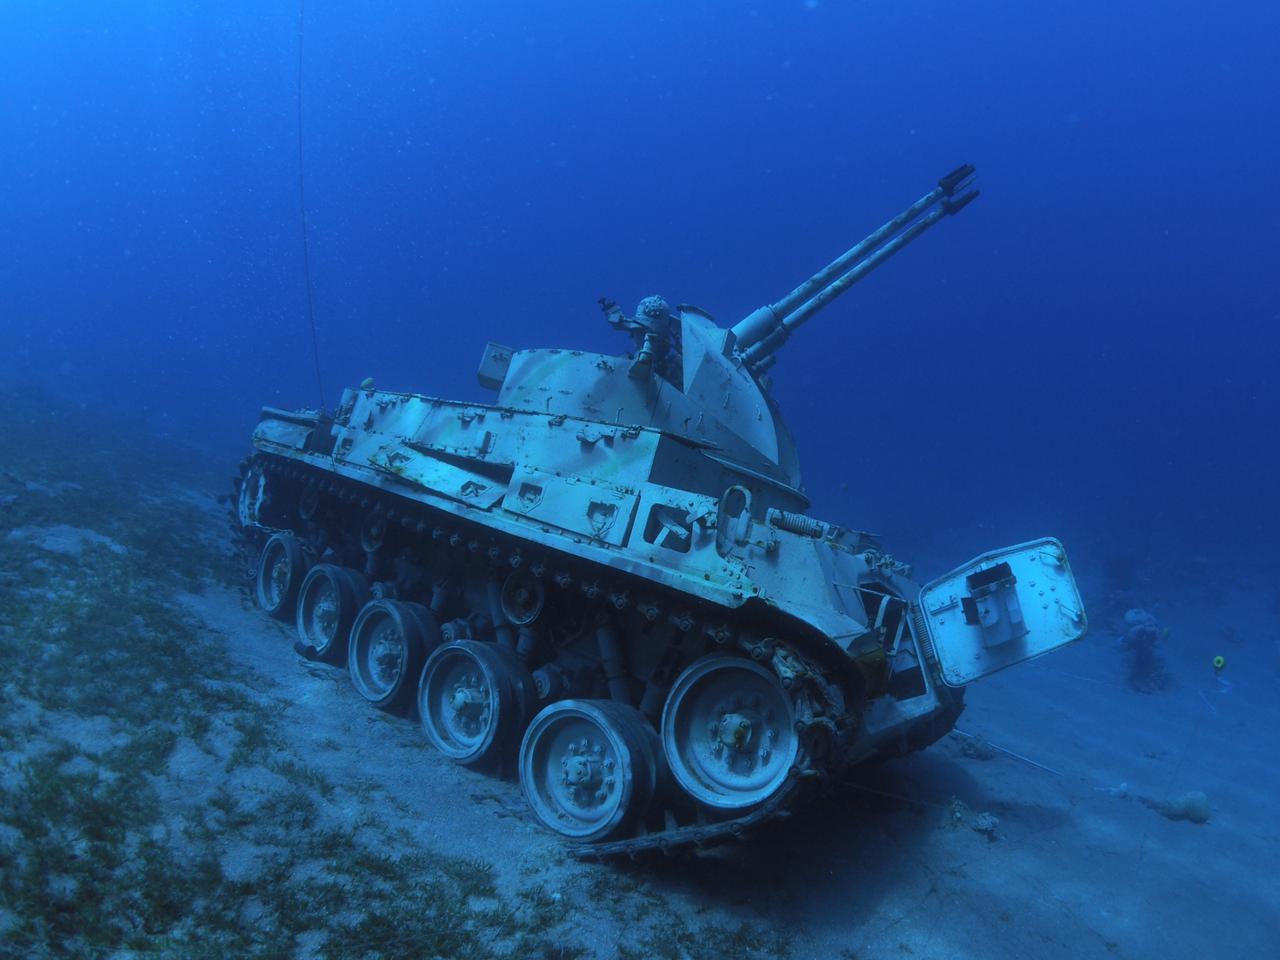 A Jordanian army tank submerged in Aqaba as part of the Underwater Military Museum, a popular scuba attraction in Jordan